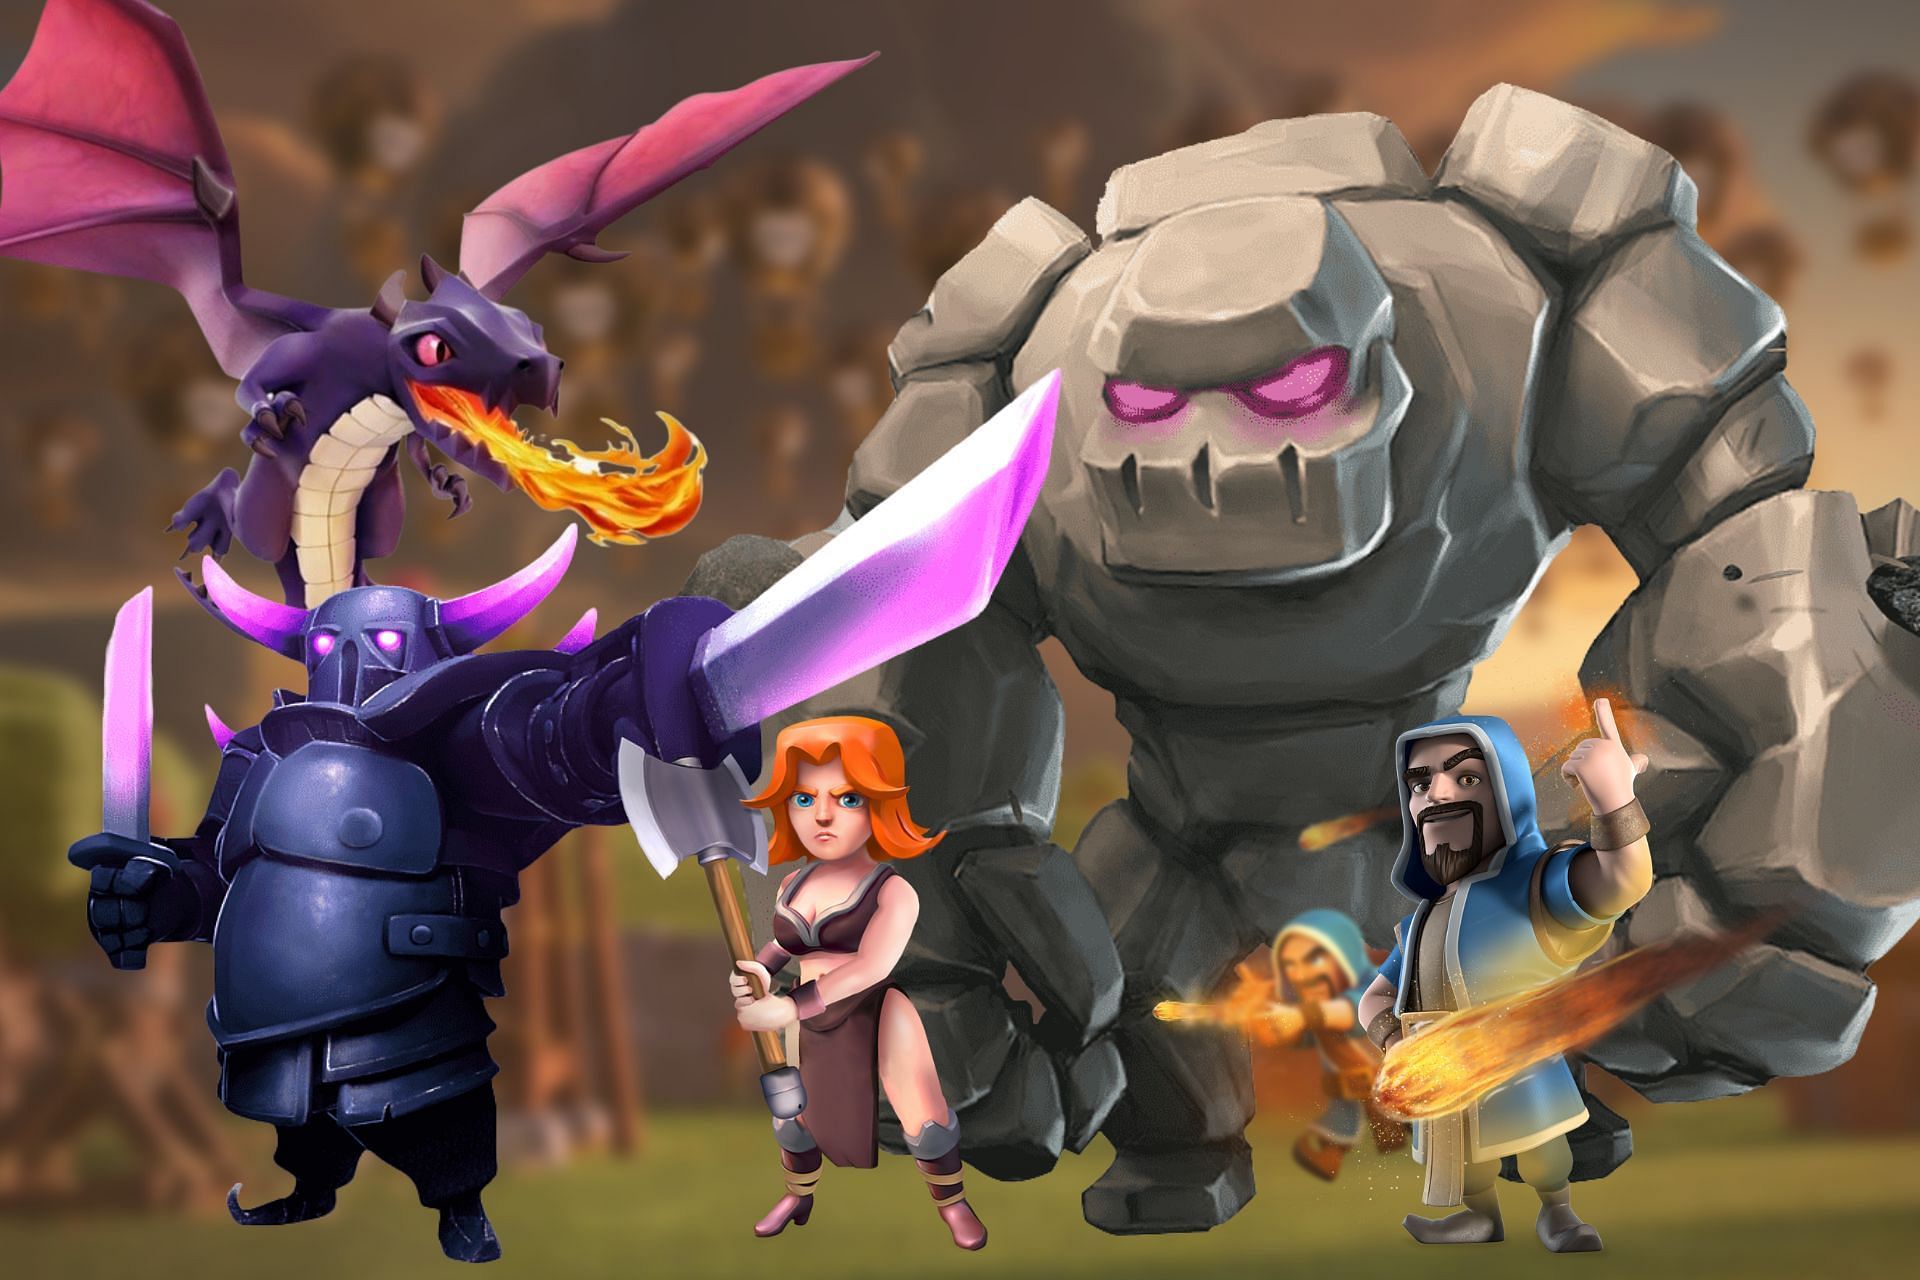 List of the best strategies that players can use in Town Hall 8 of Clash of Clans (Image via Sportskeeda)